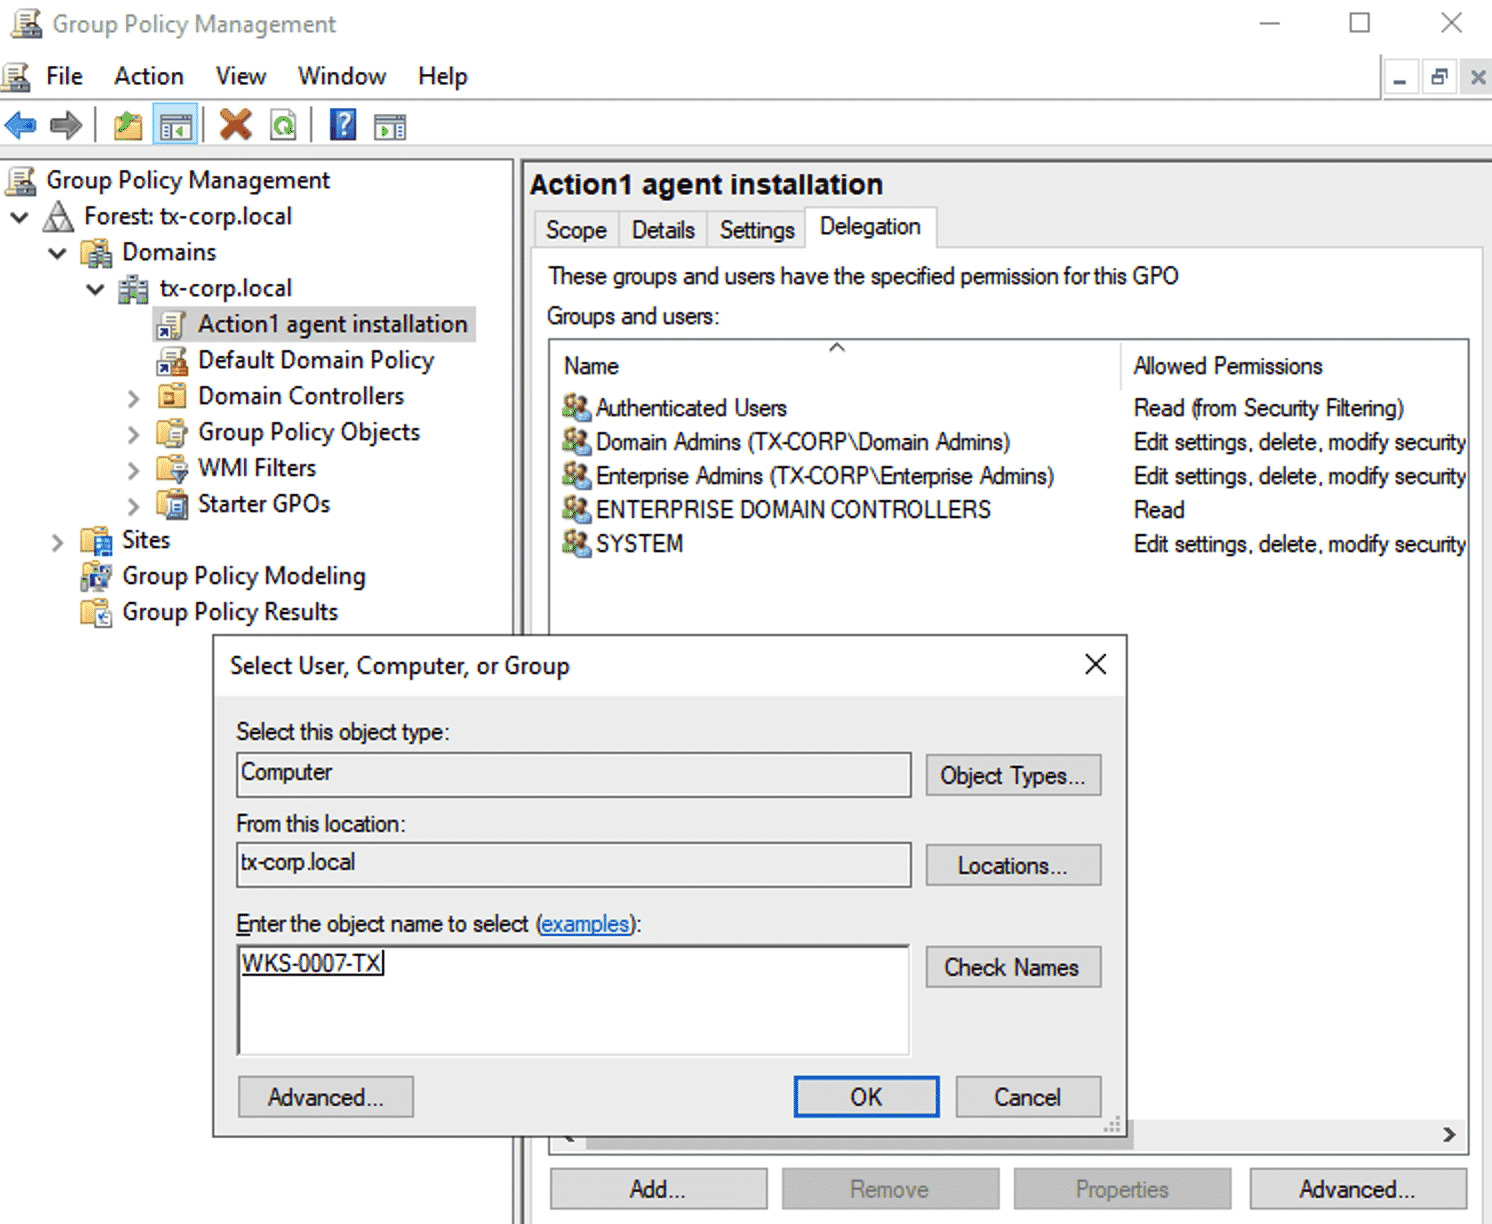 New Group Policy - the Delegation tab